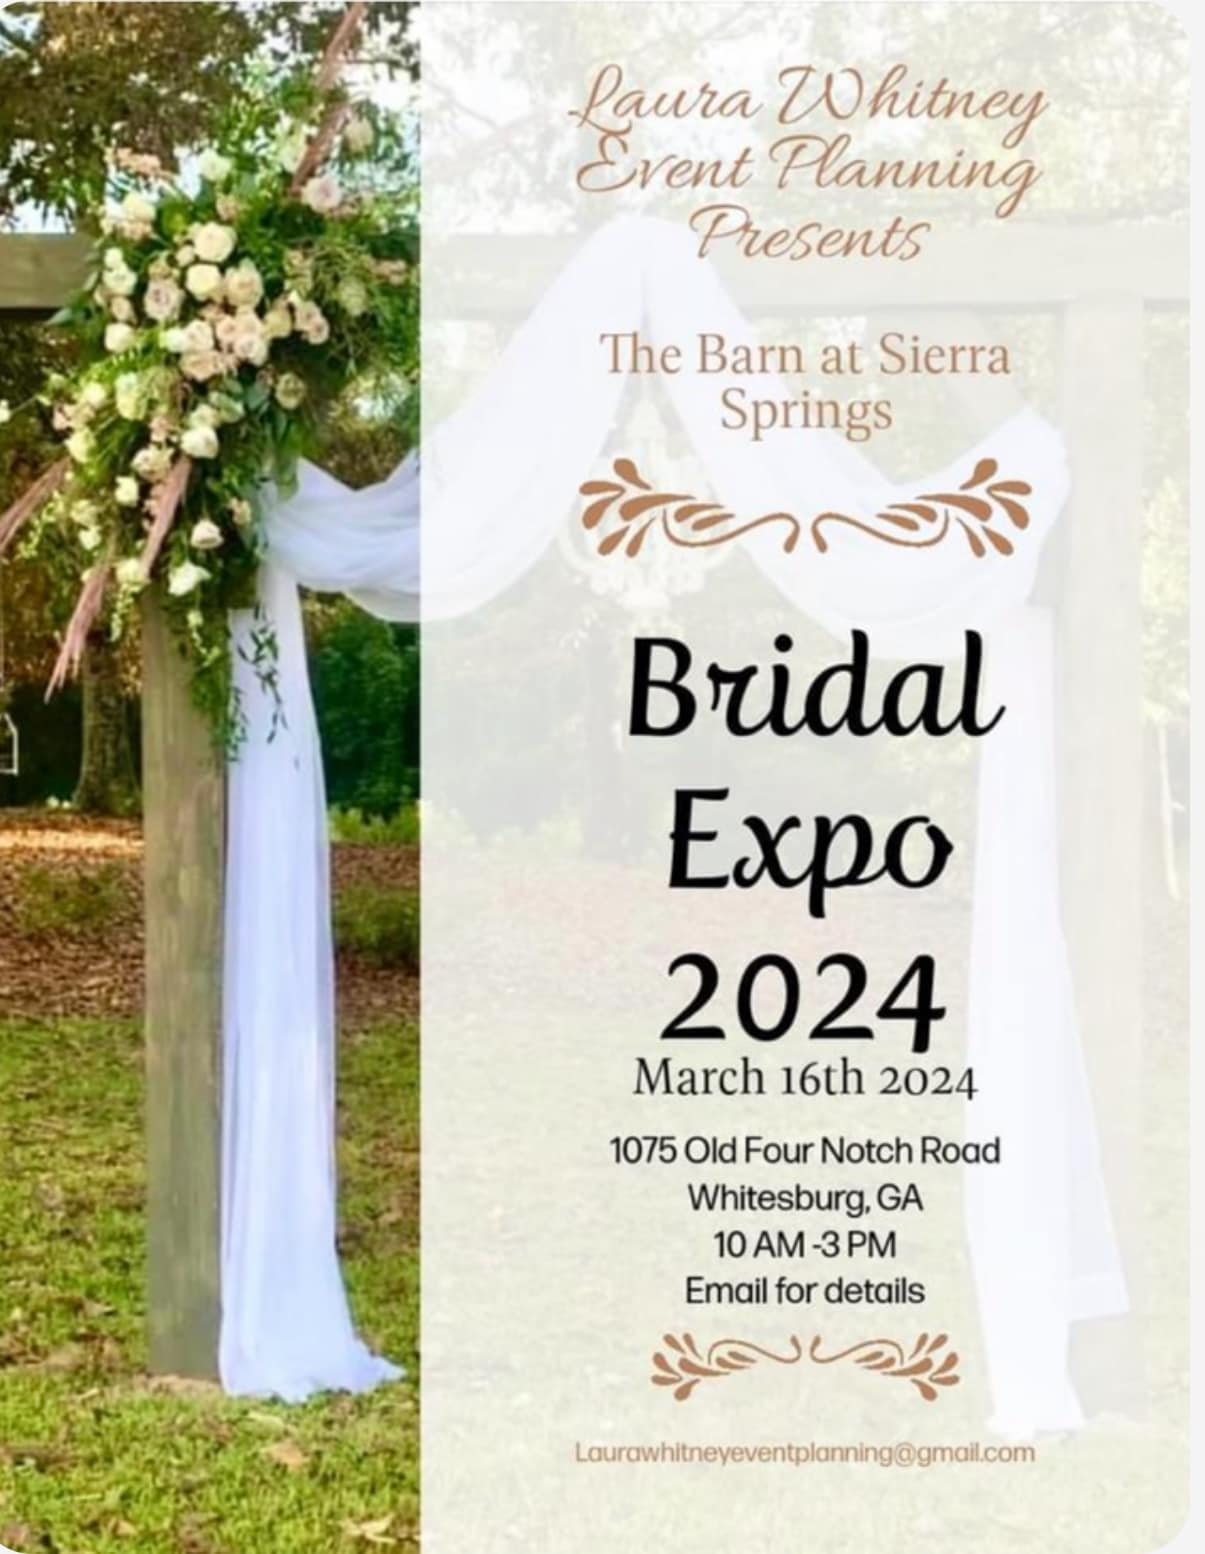 Image for post: Bridal Expo 2024 a The Barn at Sierra Springs